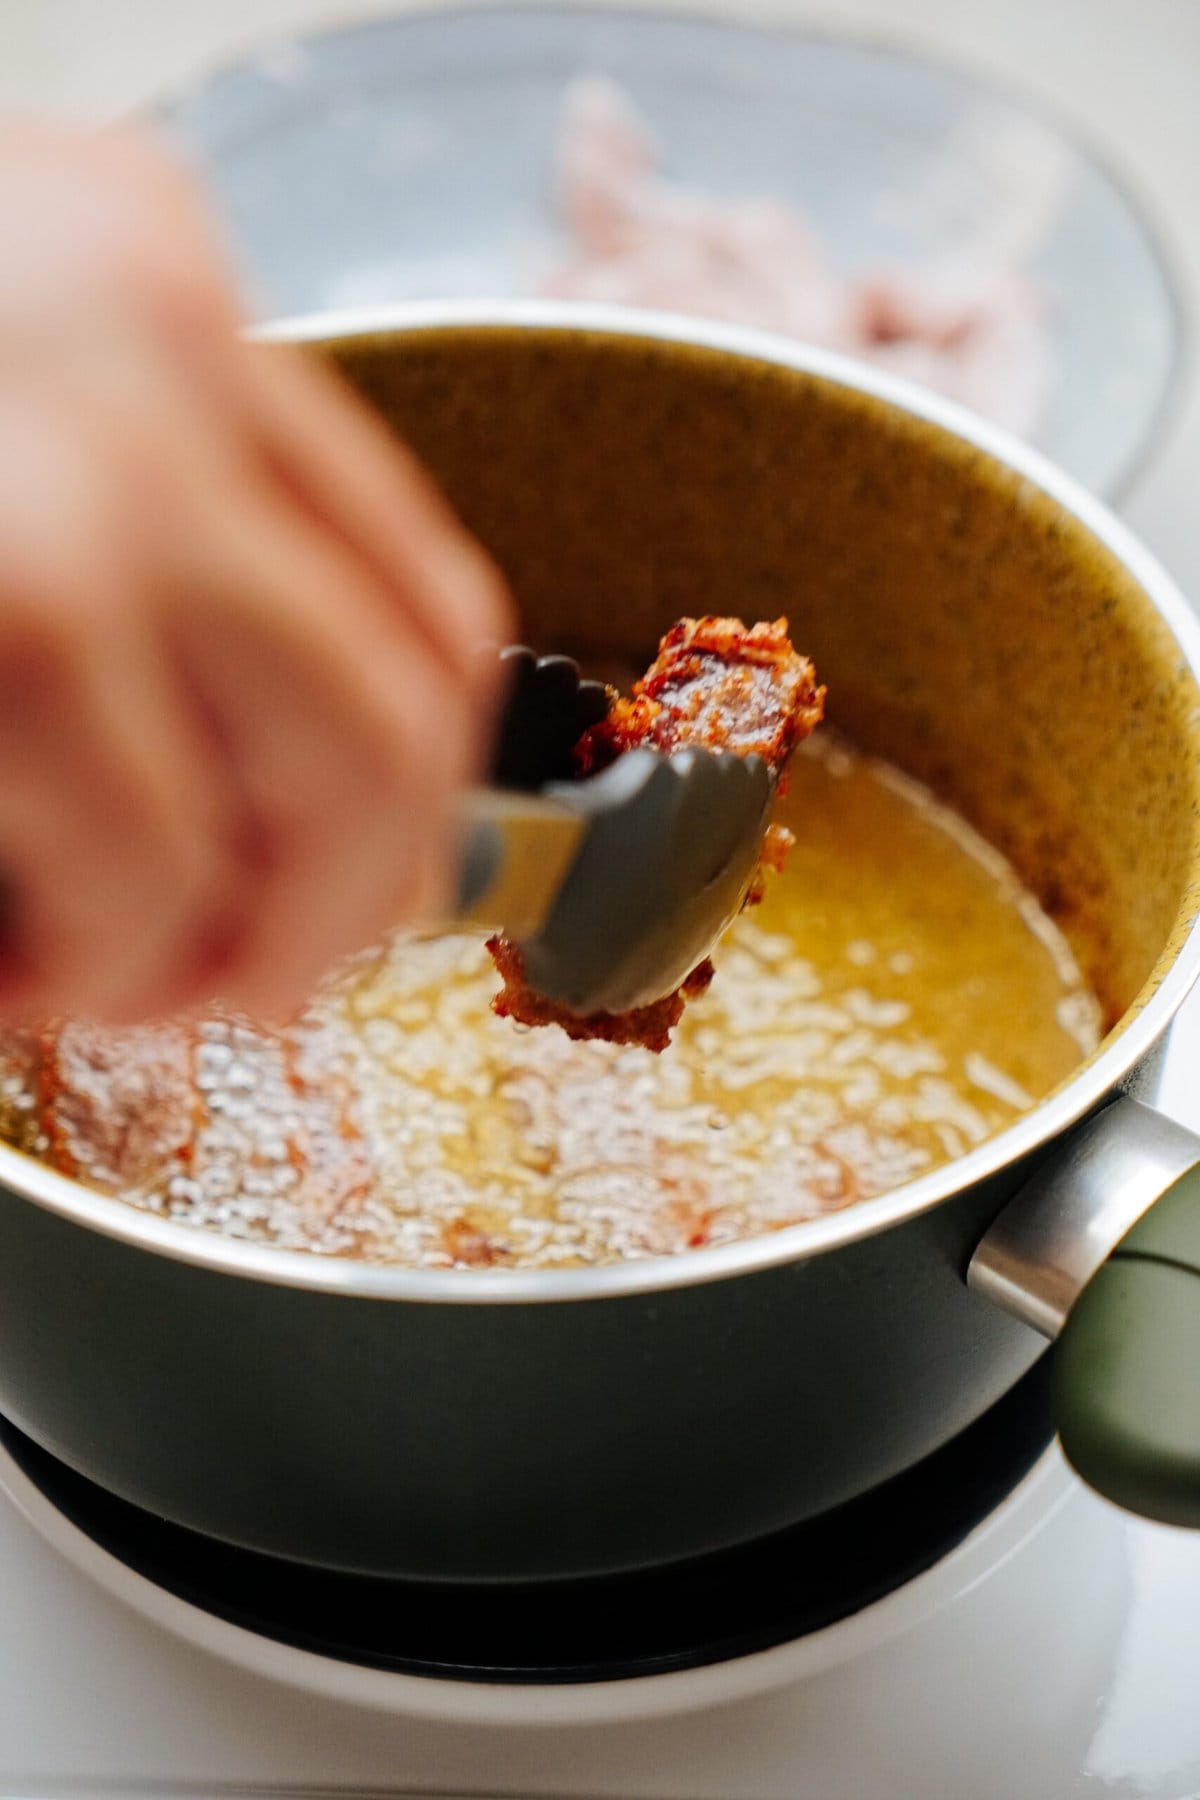 A hand holding tongs dips a piece of meat coated in breadcrumbs into hot oil in a frying pan on a stovetop.